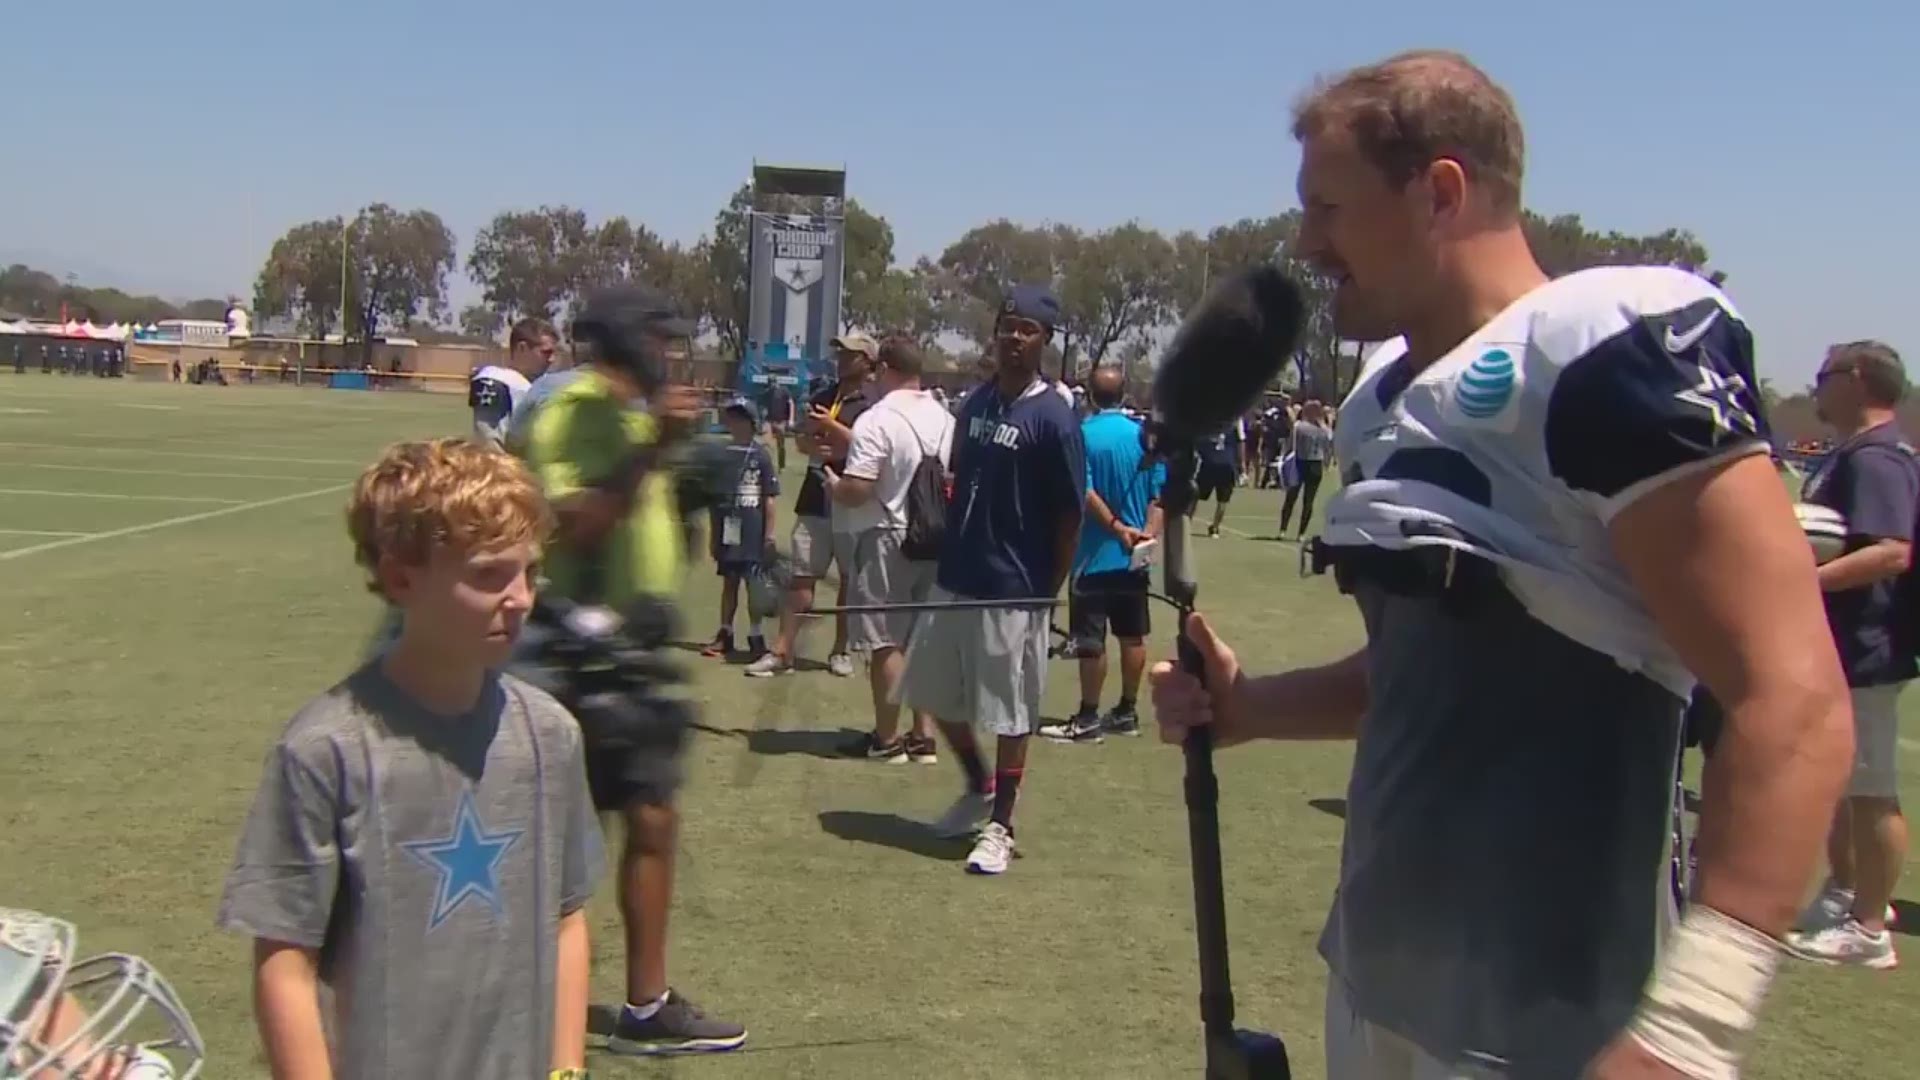 Training camp practices are all business, but when the final whistle blows it's family time in Oxnard.